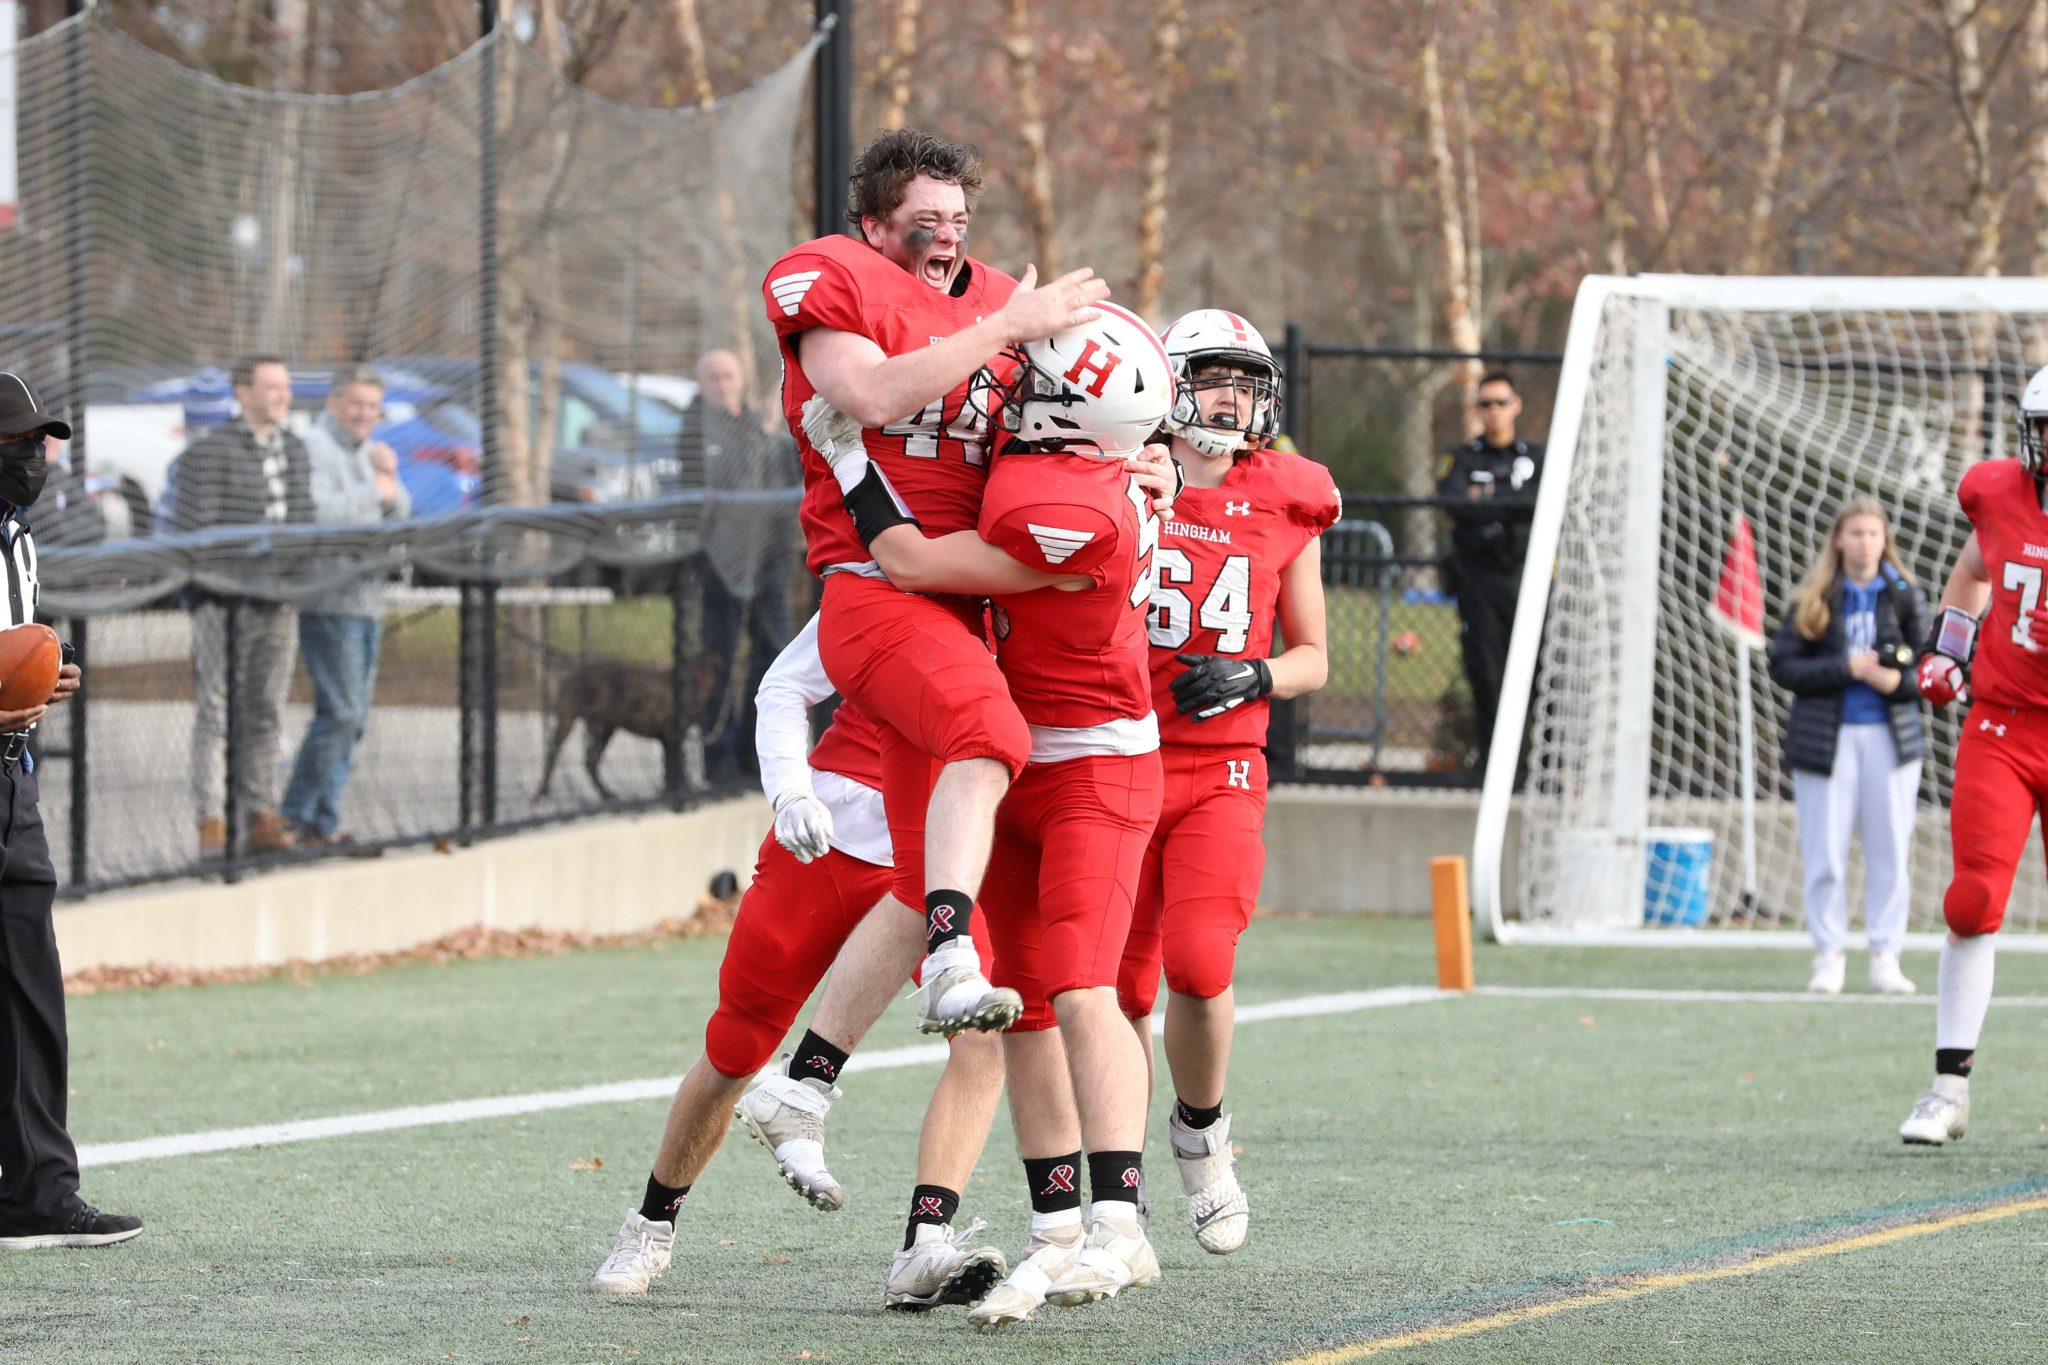 Senior captain Will Griffin scored his first of two TD's in his final game as a Hingham Harbormen.